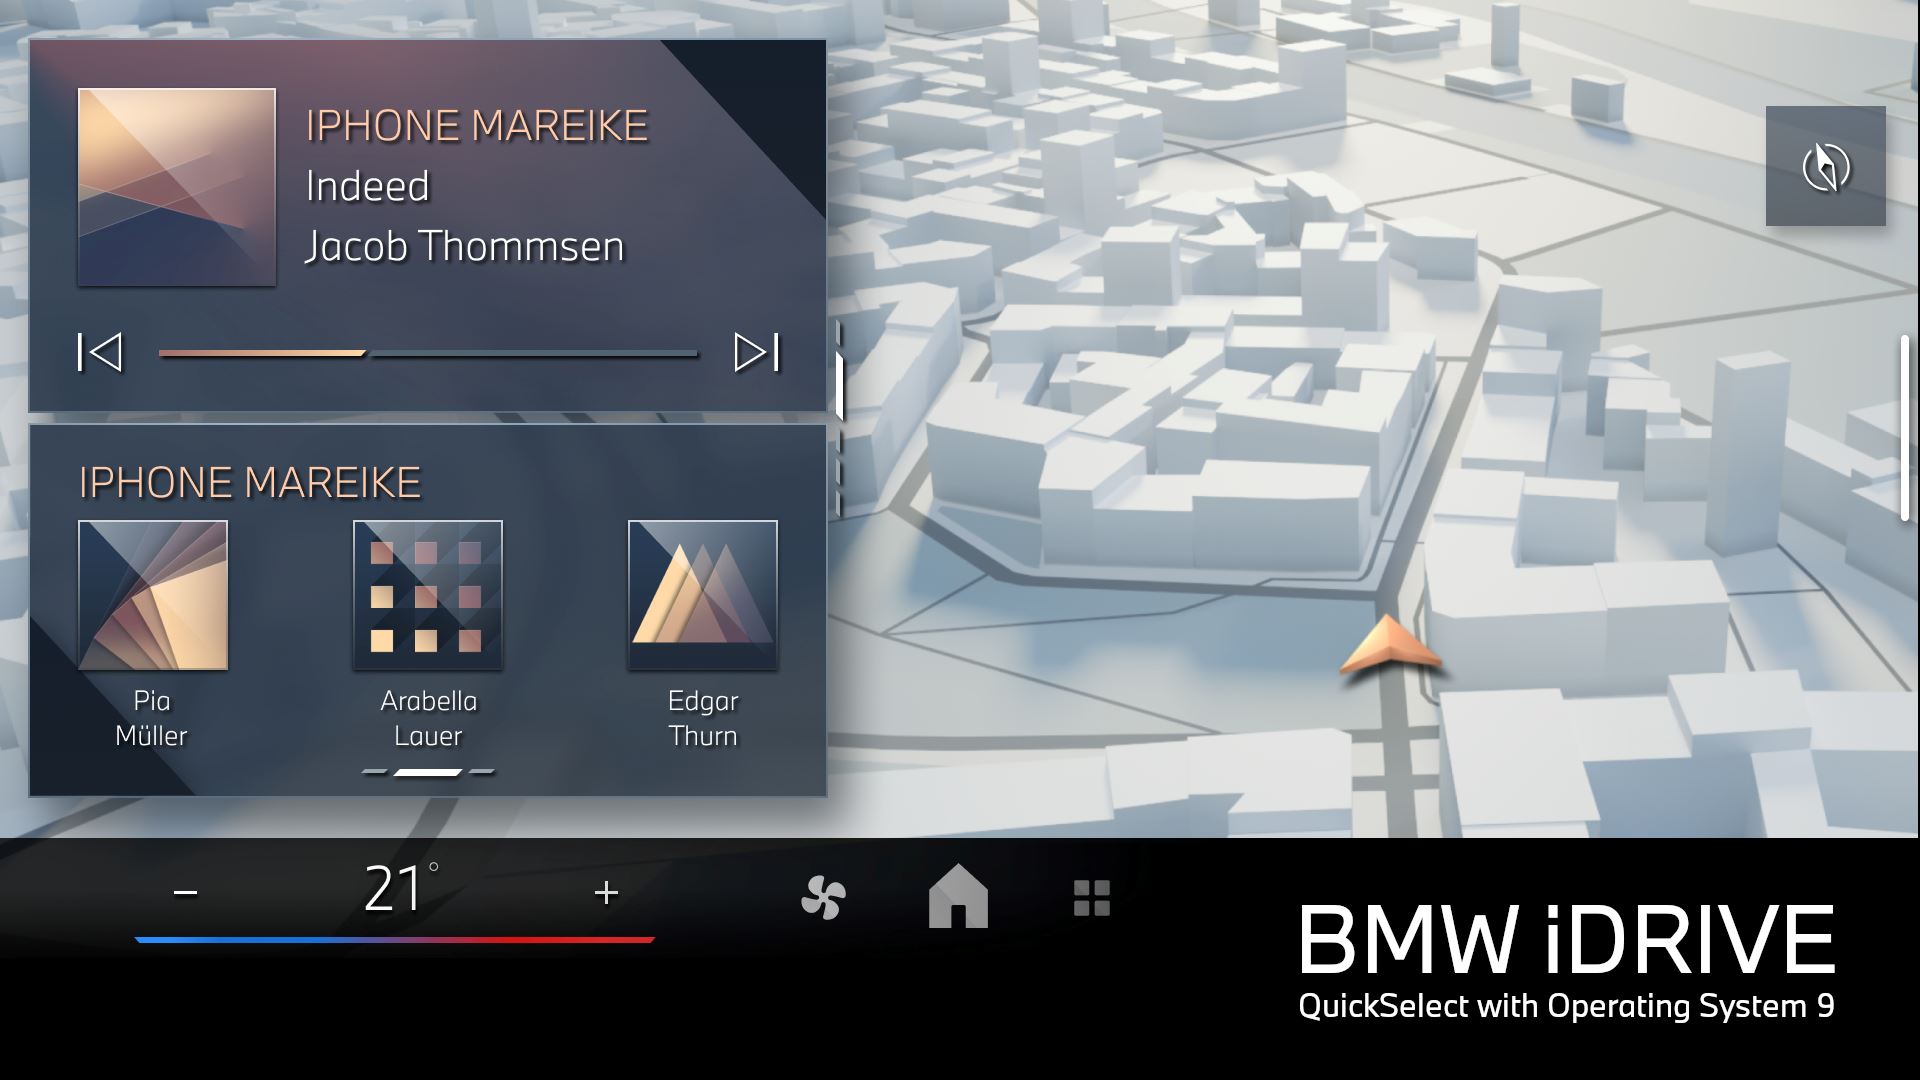 BMW Unveils the Newest Version of the BMW iDrive System